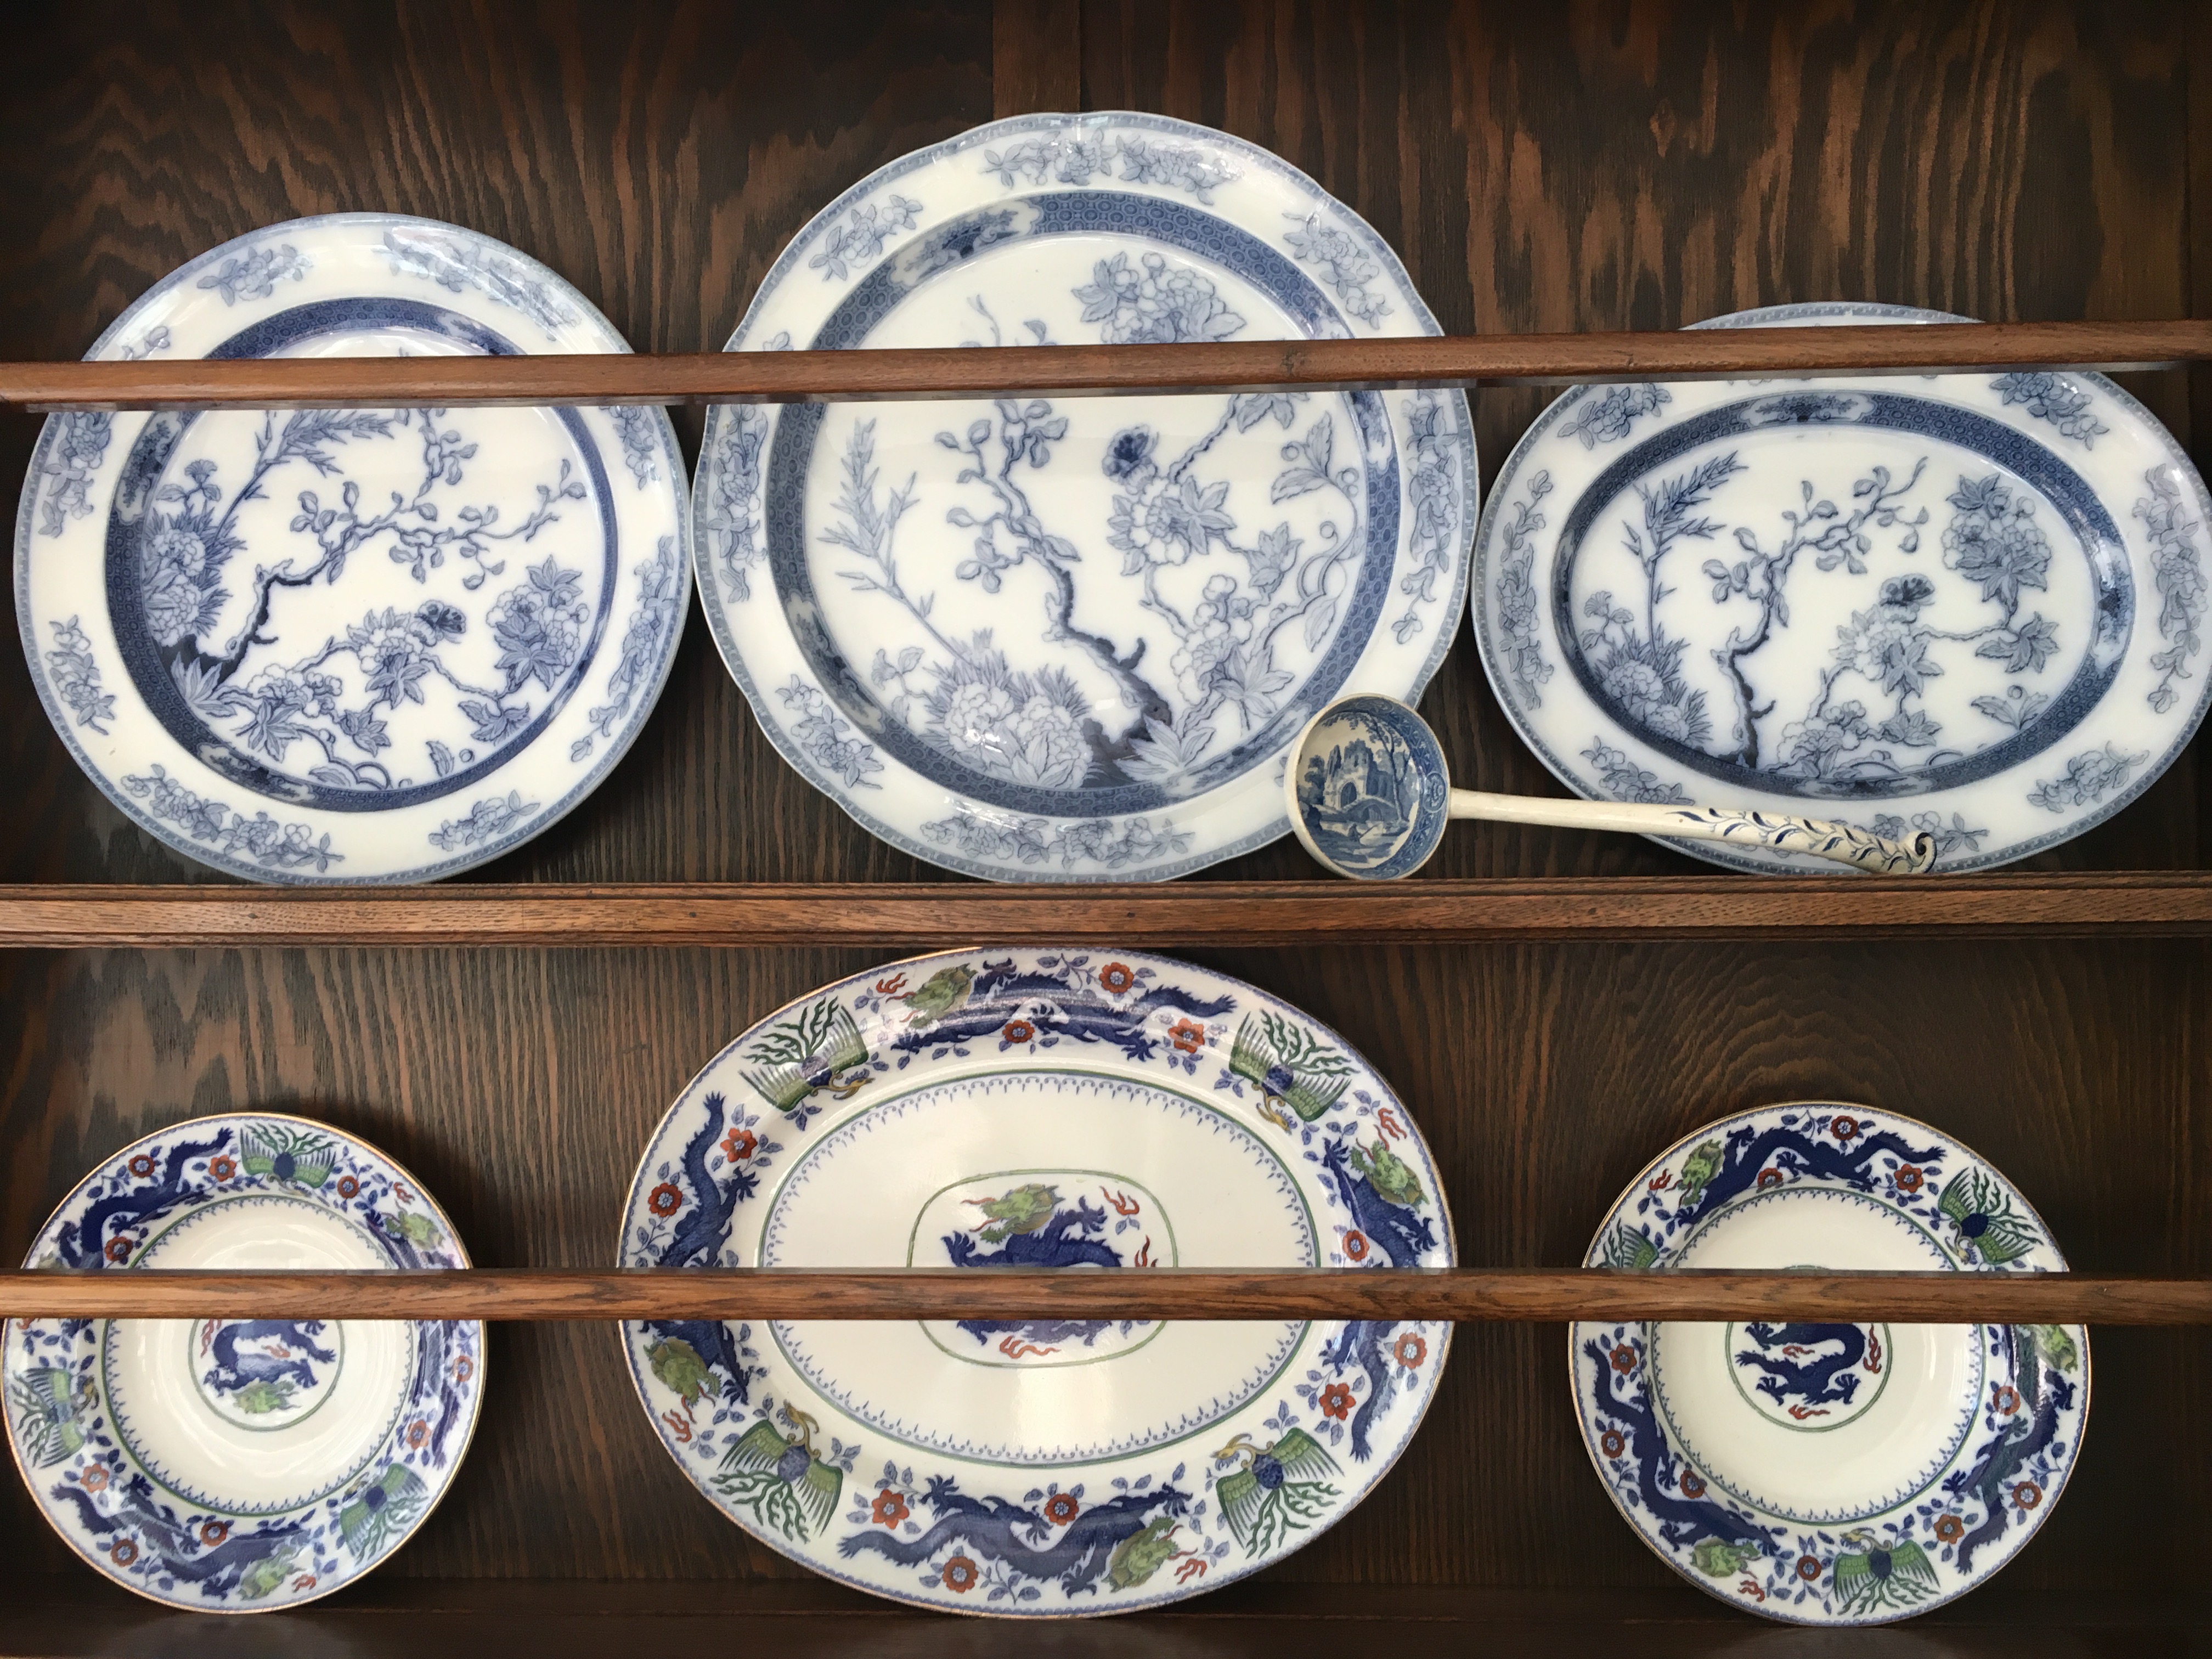 Six plates Copeland and Minton and blue and white ladle.